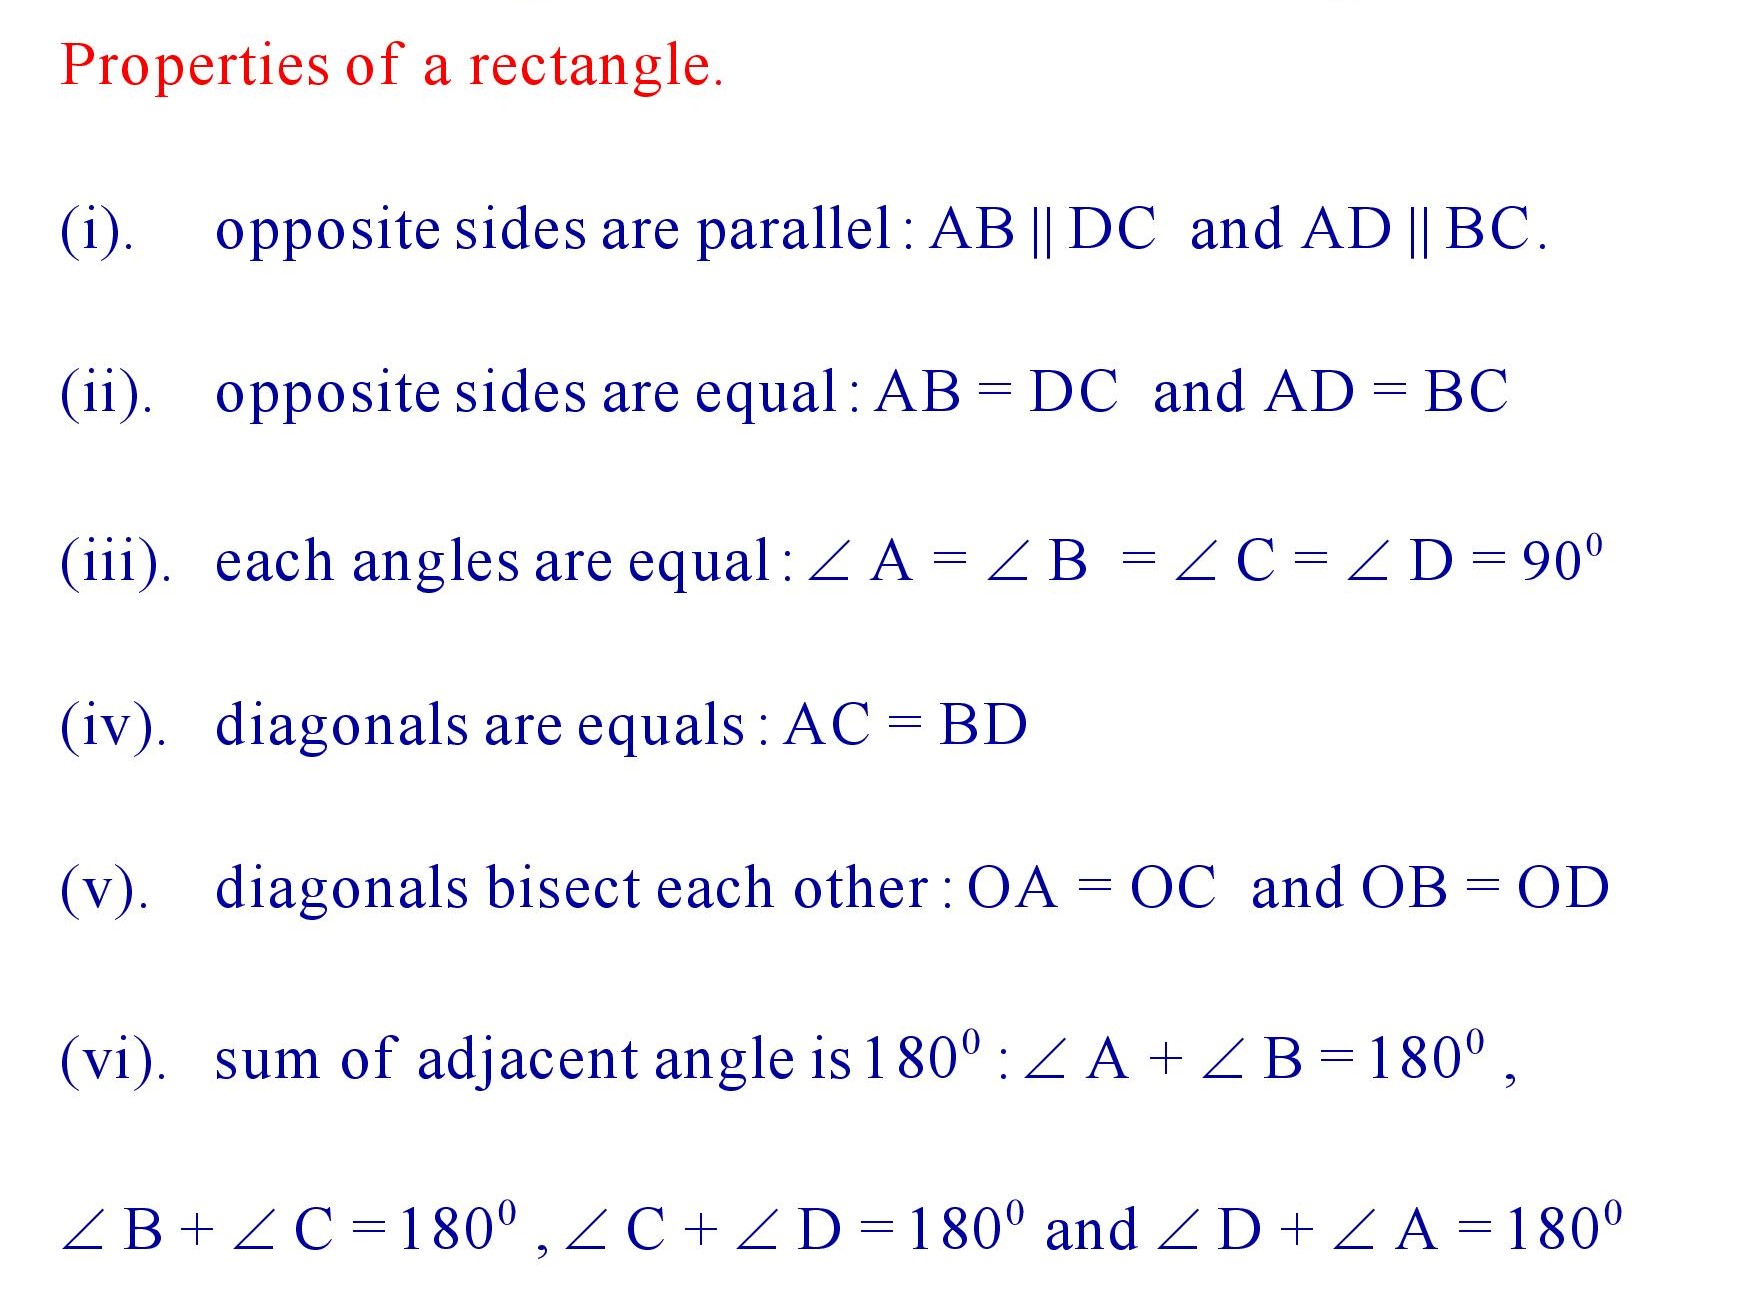 Properties of a Rectangle